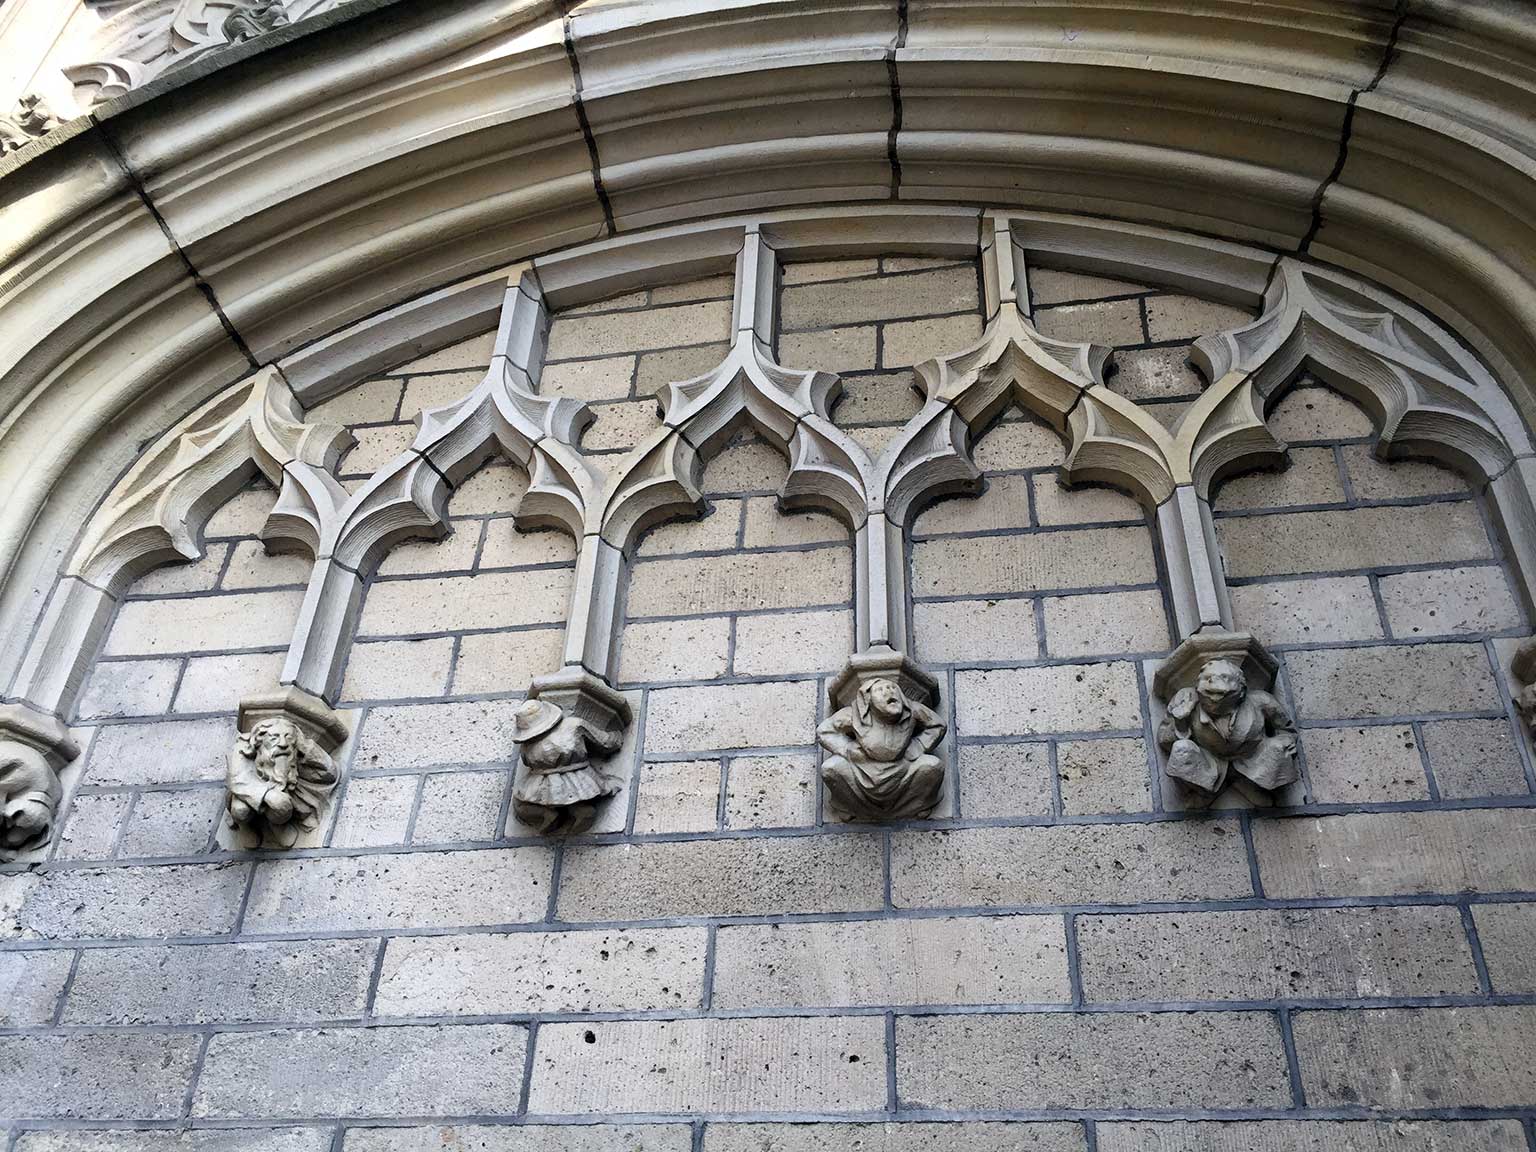 Small sculptures on the south side of the Nieuwe Kerk, Amsterdam